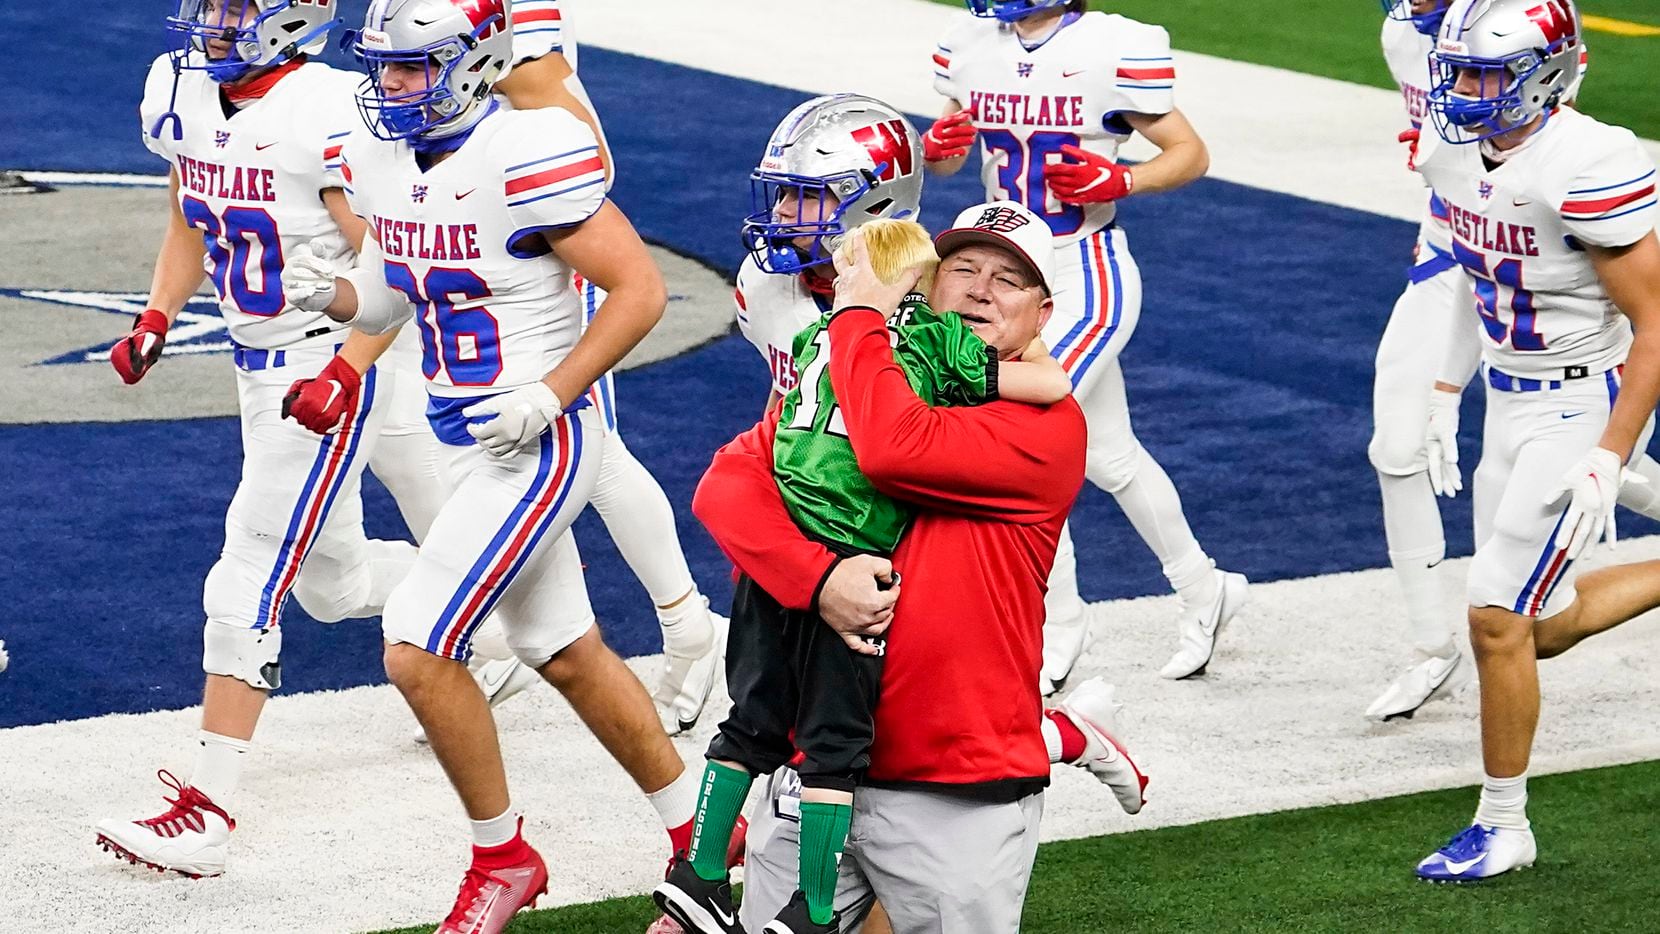 Austin Westlake head coach Todd Dodge hugs his grandson Tate, 5, as his team takes the field to warm warm up before facing his son, Southlake Carroll head coach Riley Dodge, in the Class 6A Division I state football championship game at AT&T Stadium on Saturday, Jan. 16, 2021, in Arlington, Texas.